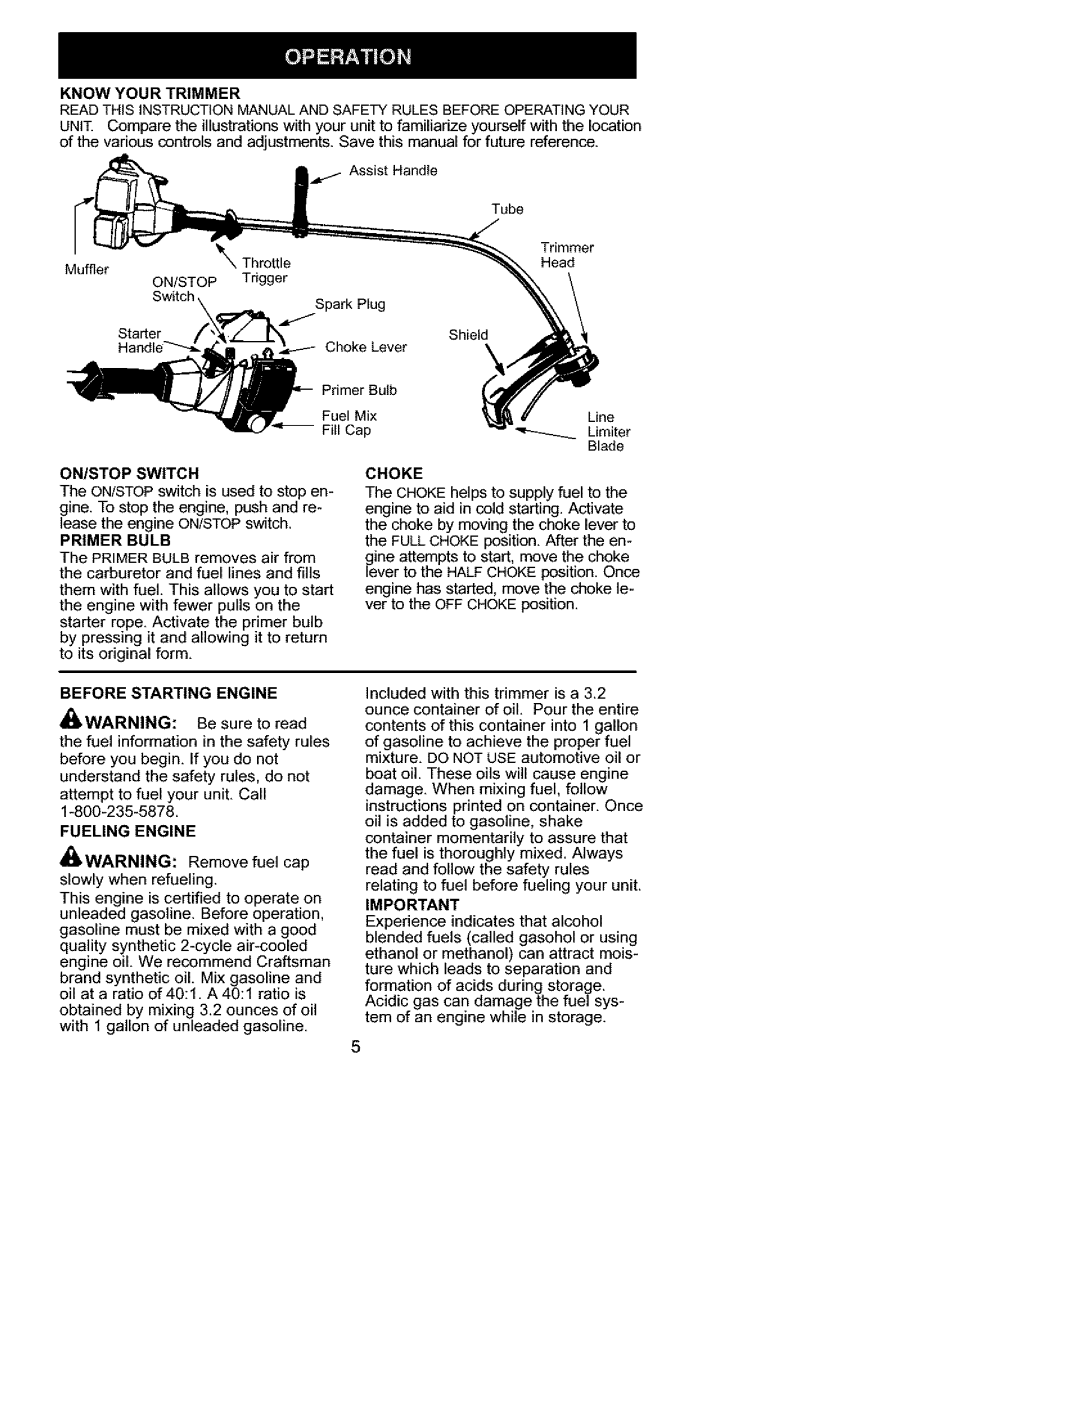 Craftsman 358.745511 instruction manual PrimerBulb, Know Your Trimmer, Before Starting Engine 